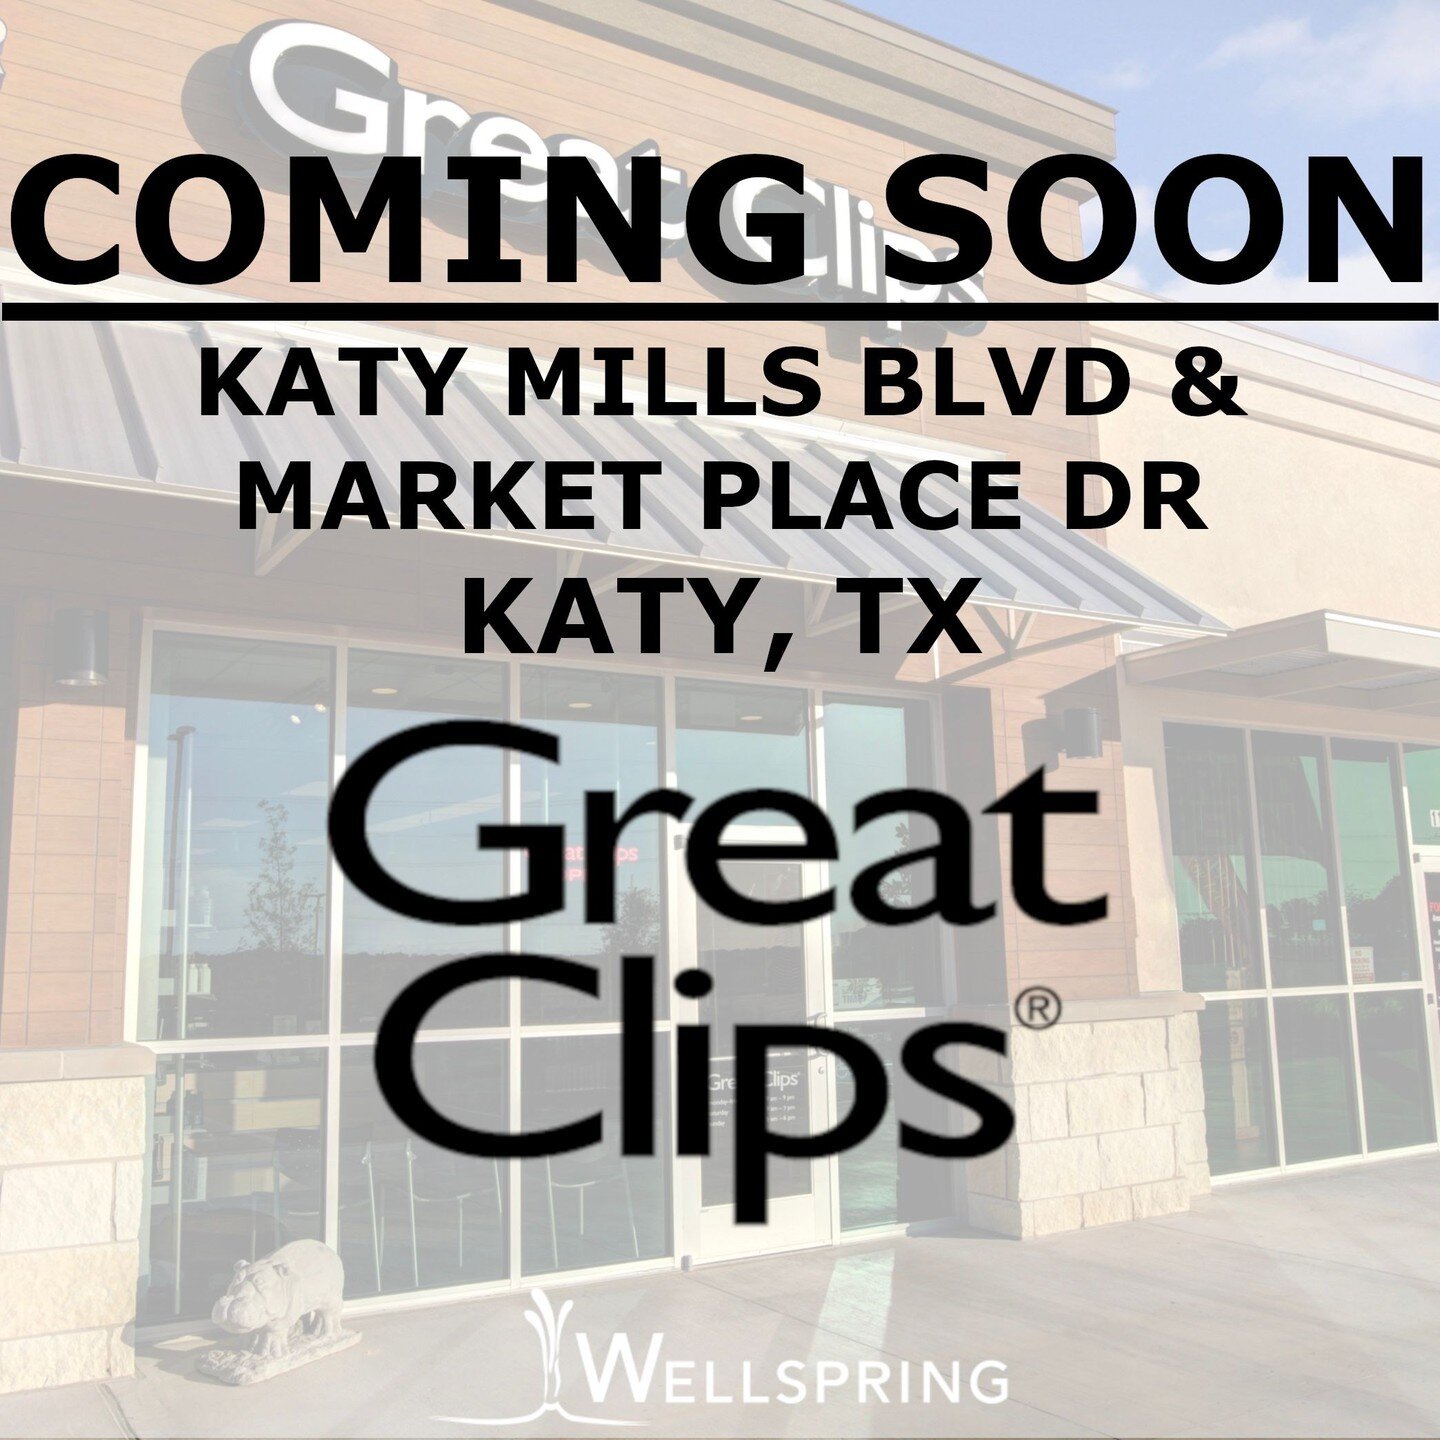 Coming soon to Katy, Texas in the Katy Mills area is another new Great Clips salon!

Ethan Beck with S&amp;P Interests represented the Landlord, and Marshall C. Bumpus with Wellspring represented the Tenant.

#wellspringcre #cre #retail #tenantrep #g